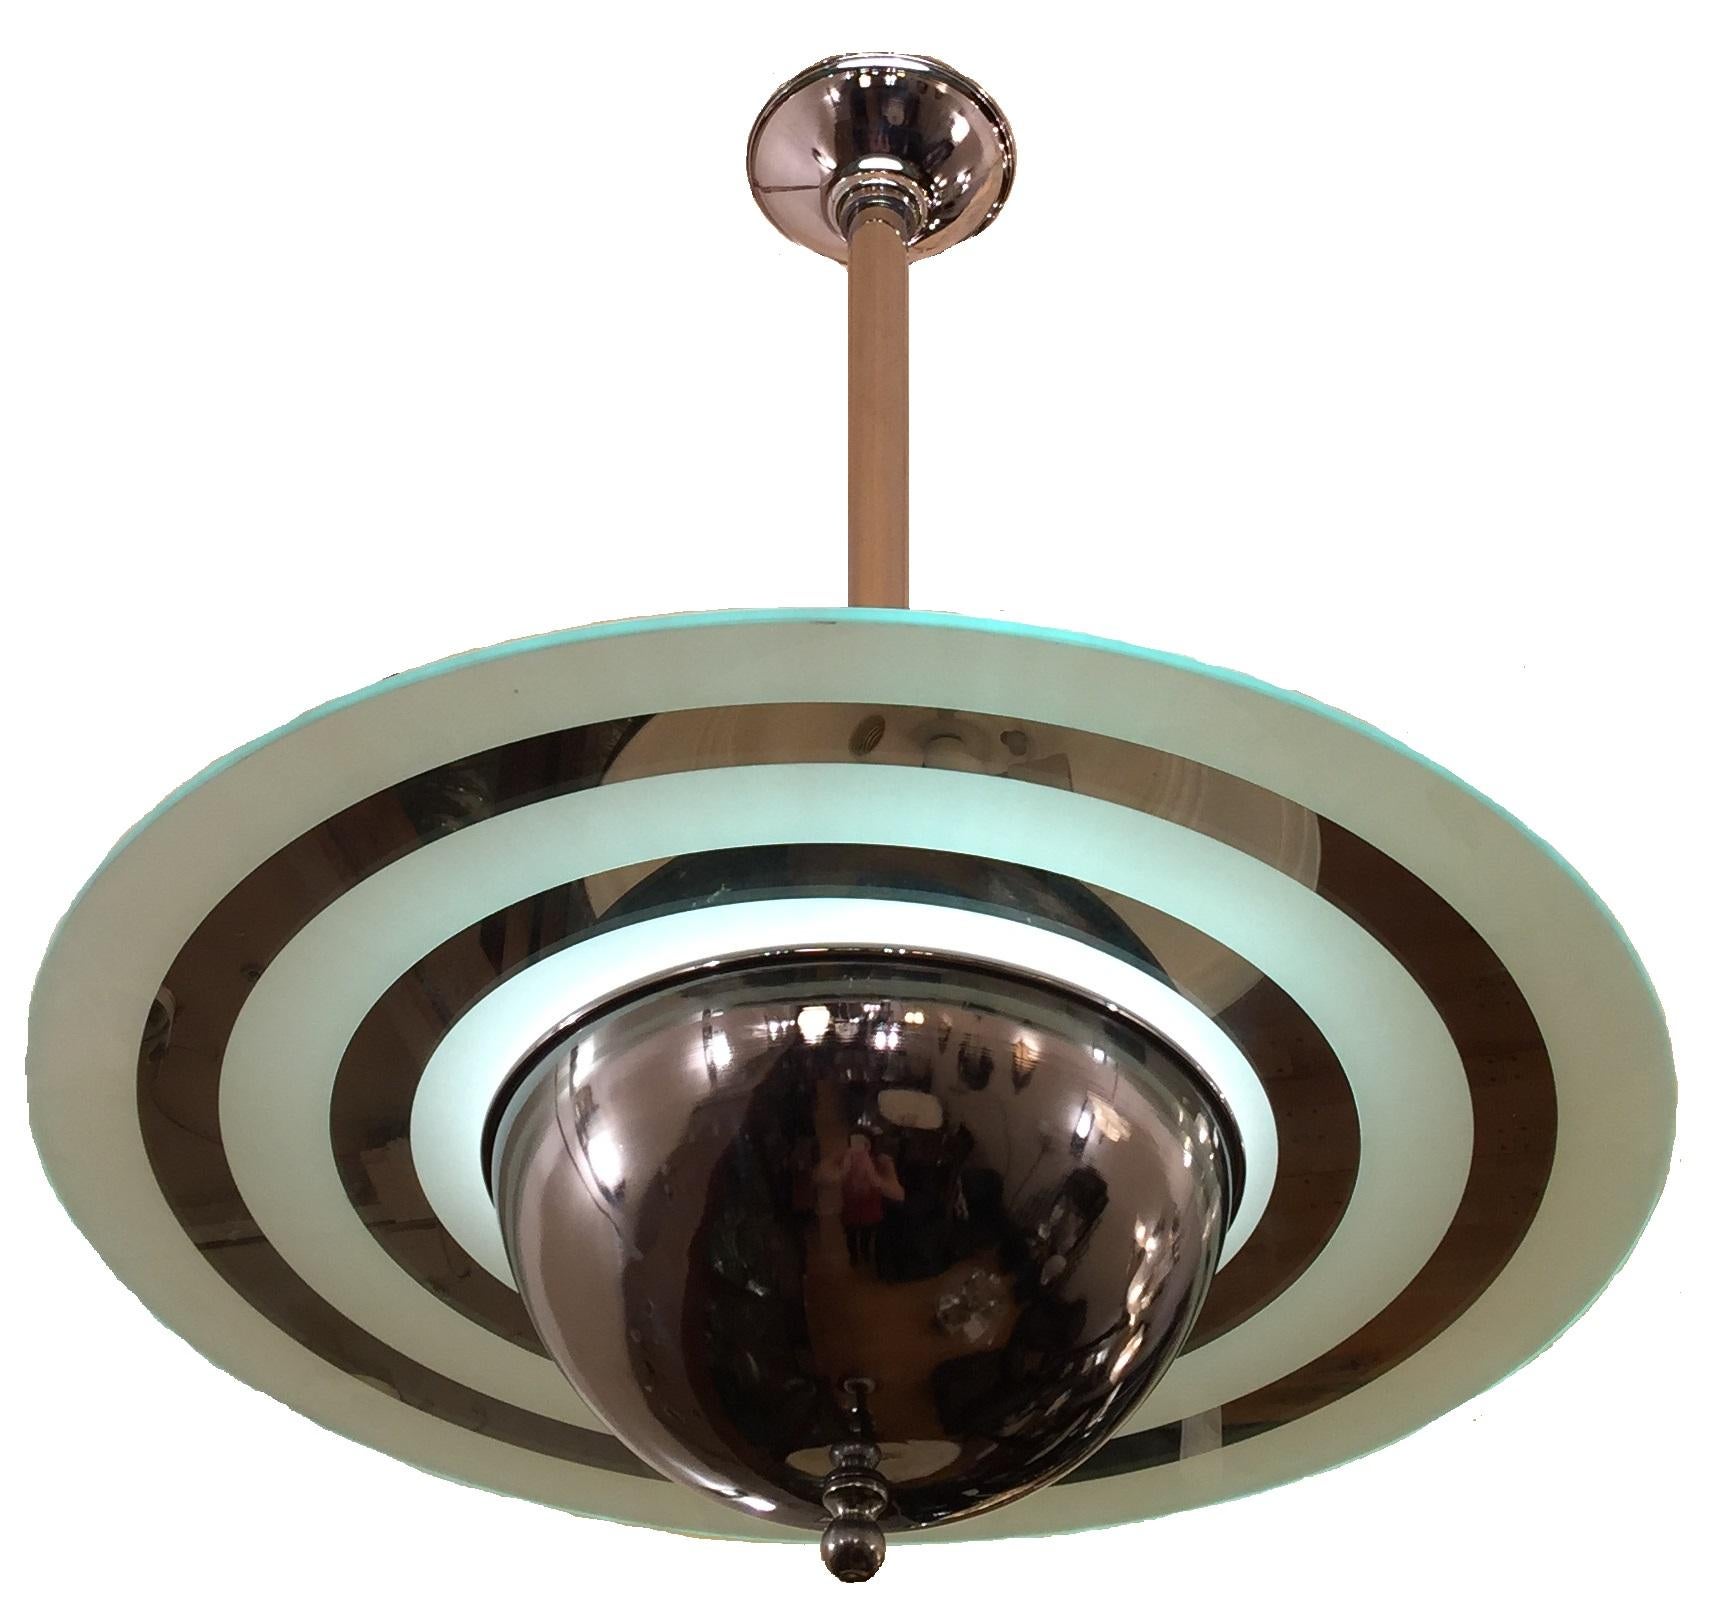 2-Hanging lamps

Material: Chromed , glass, mirror
Style: Art Deco
Country:German
To take care of your property and the lives of our customers, the new wiring has been done.
We have specialized in the sale of Art Deco and Art Nouveau and Vintage